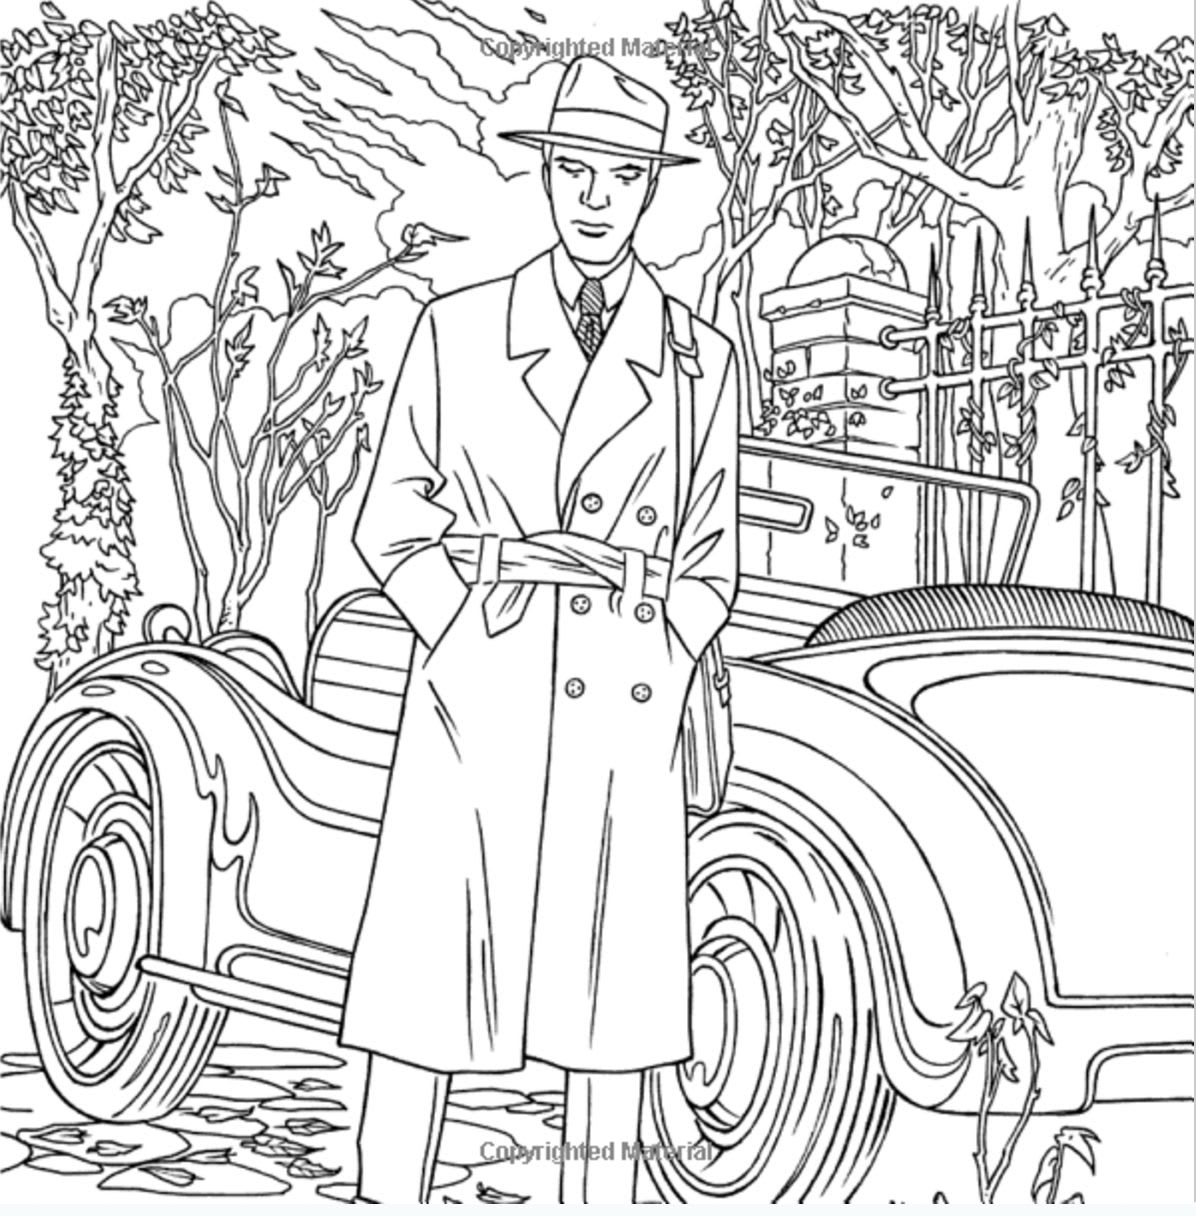 Download 20 Outlander Coloring Pages - Printable Coloring Pages